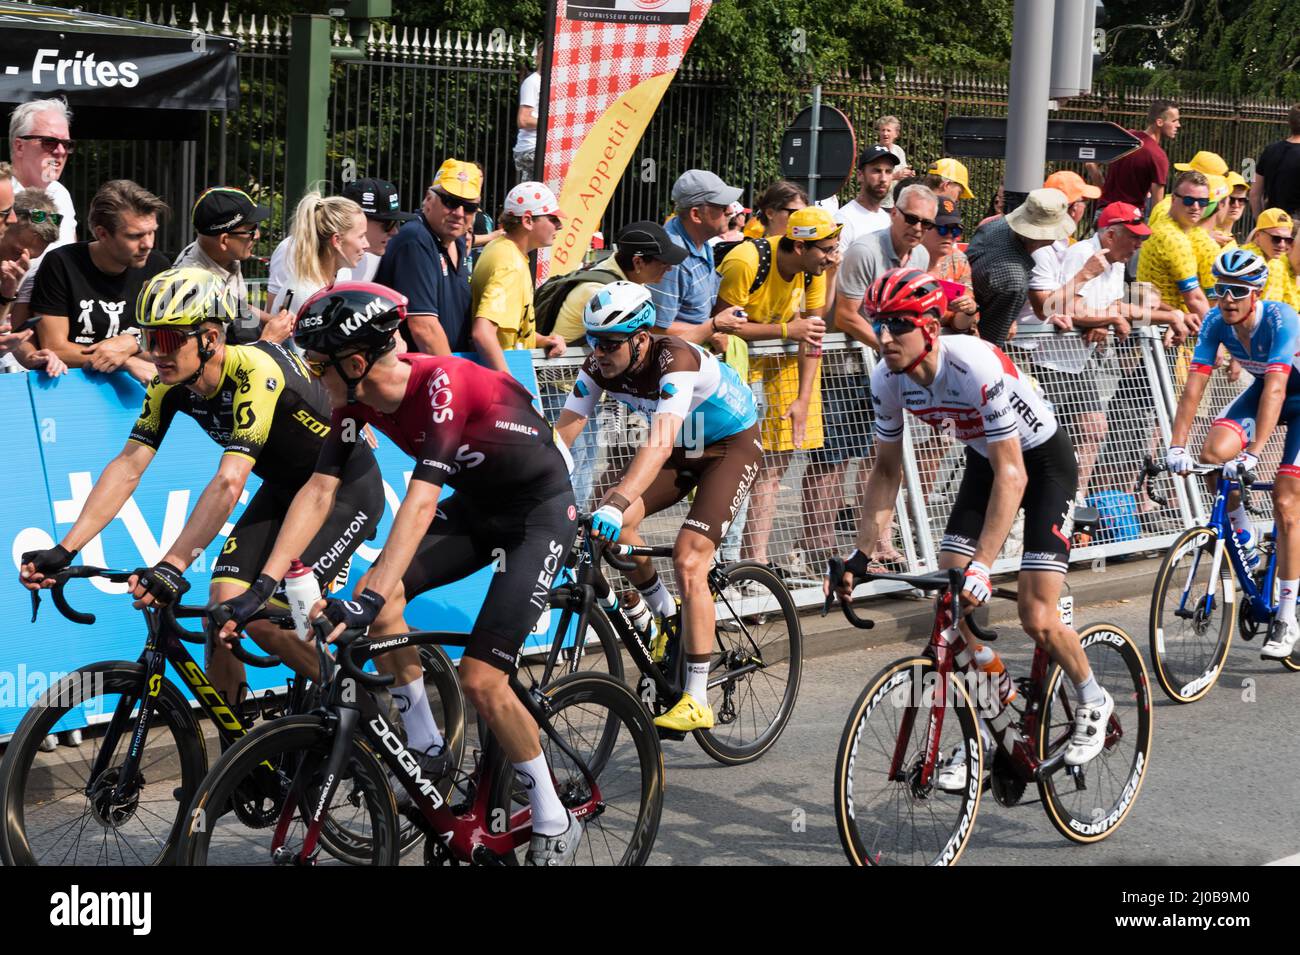 Saint Gilles, Brussels - Belgium - 07 08 2019 Bicyclists passing by in the final kilometer of the first etappe of the Tour de France 2019 Stock Photo